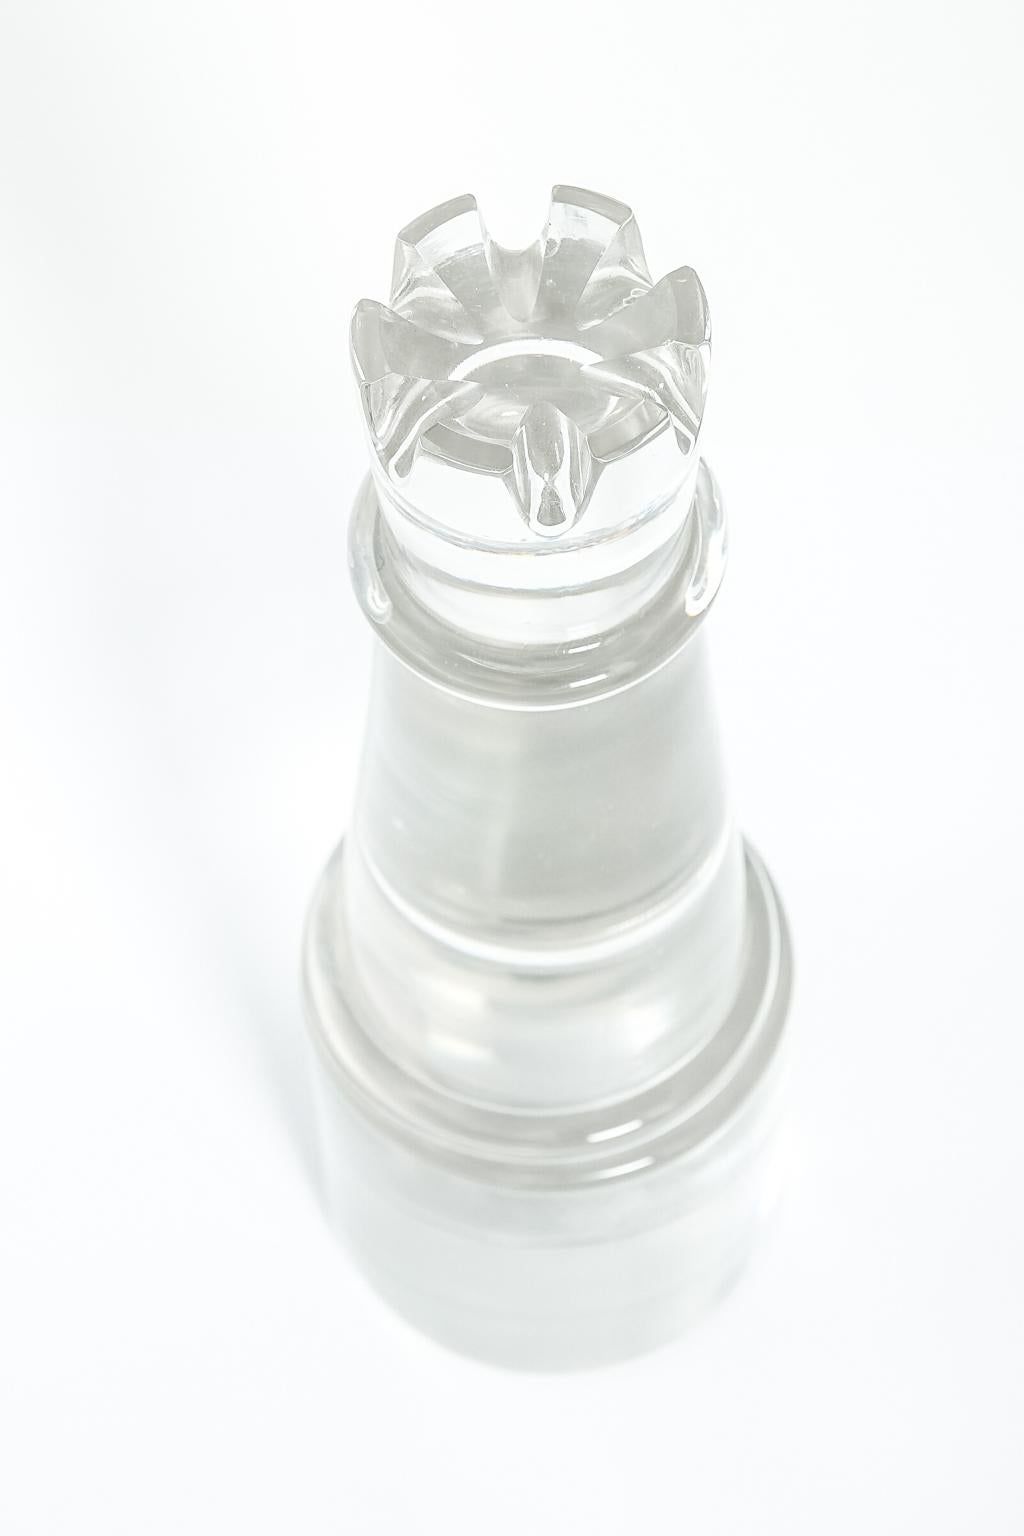 Cartier Display Oversized Glass Chess Pieces 1